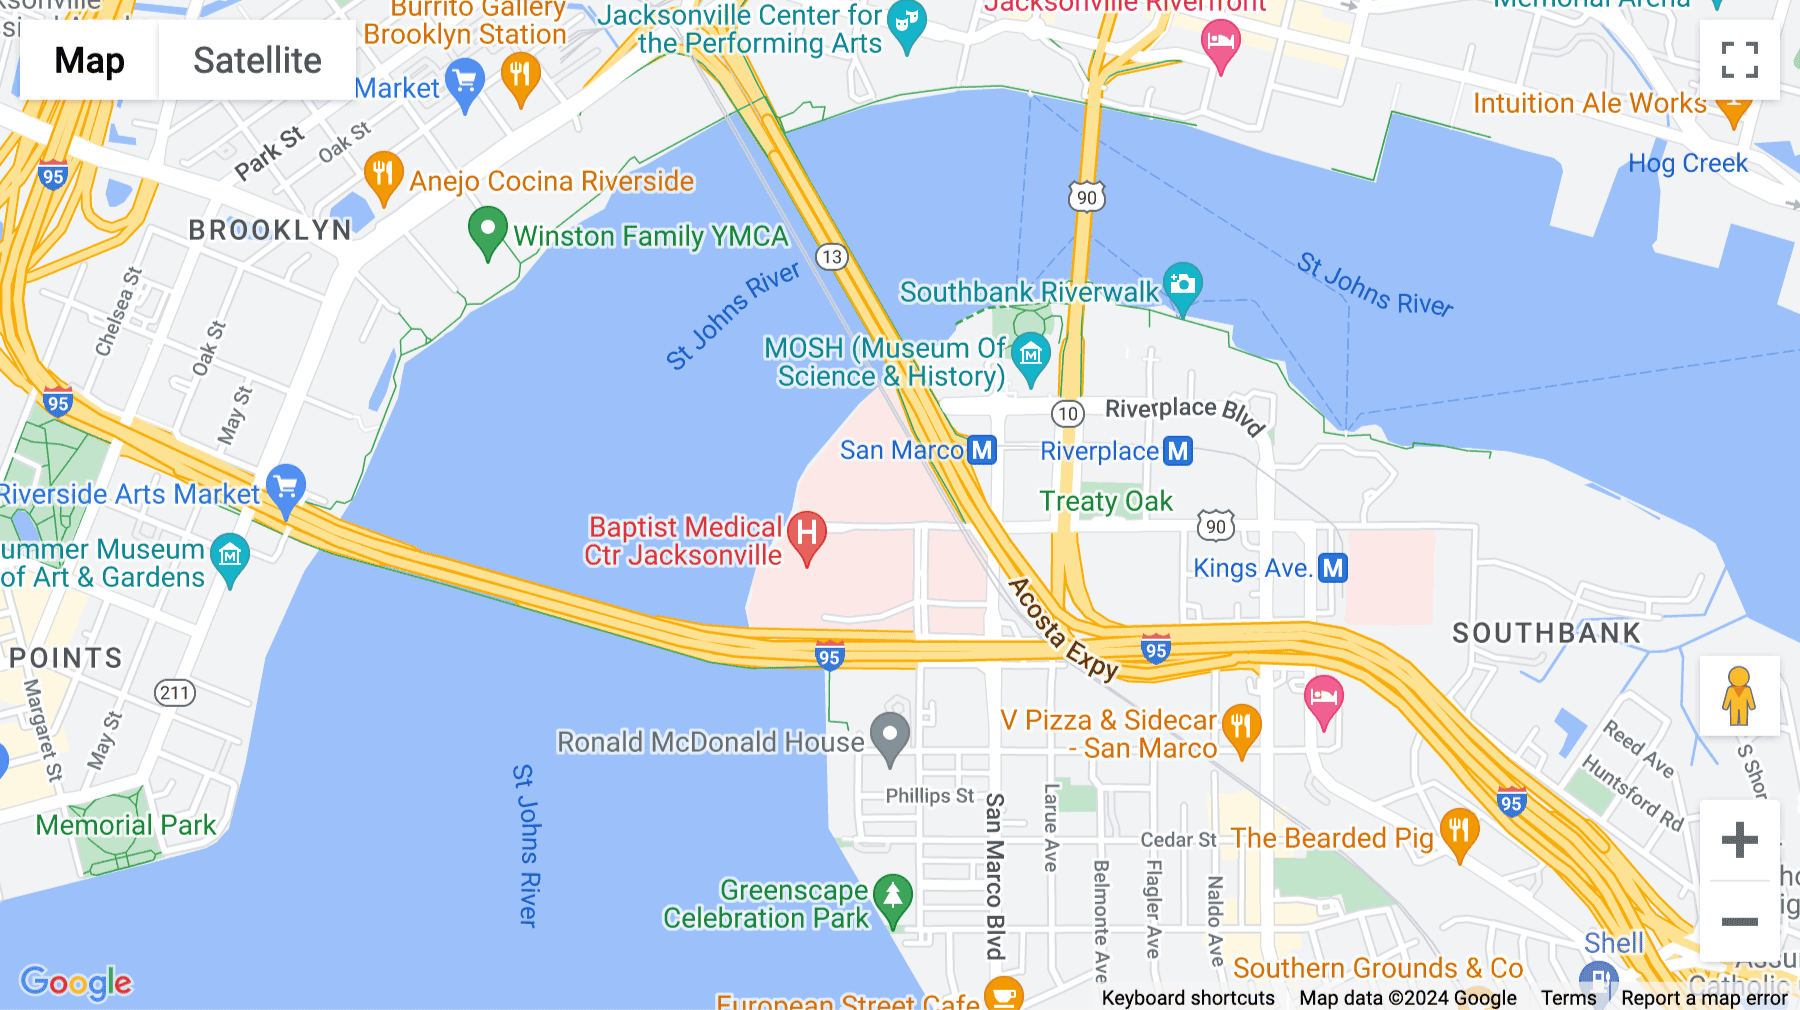 Click for interative map of 841 Prudential Drive, 12th Floor, Jacksonville, Florida, Jacksonville